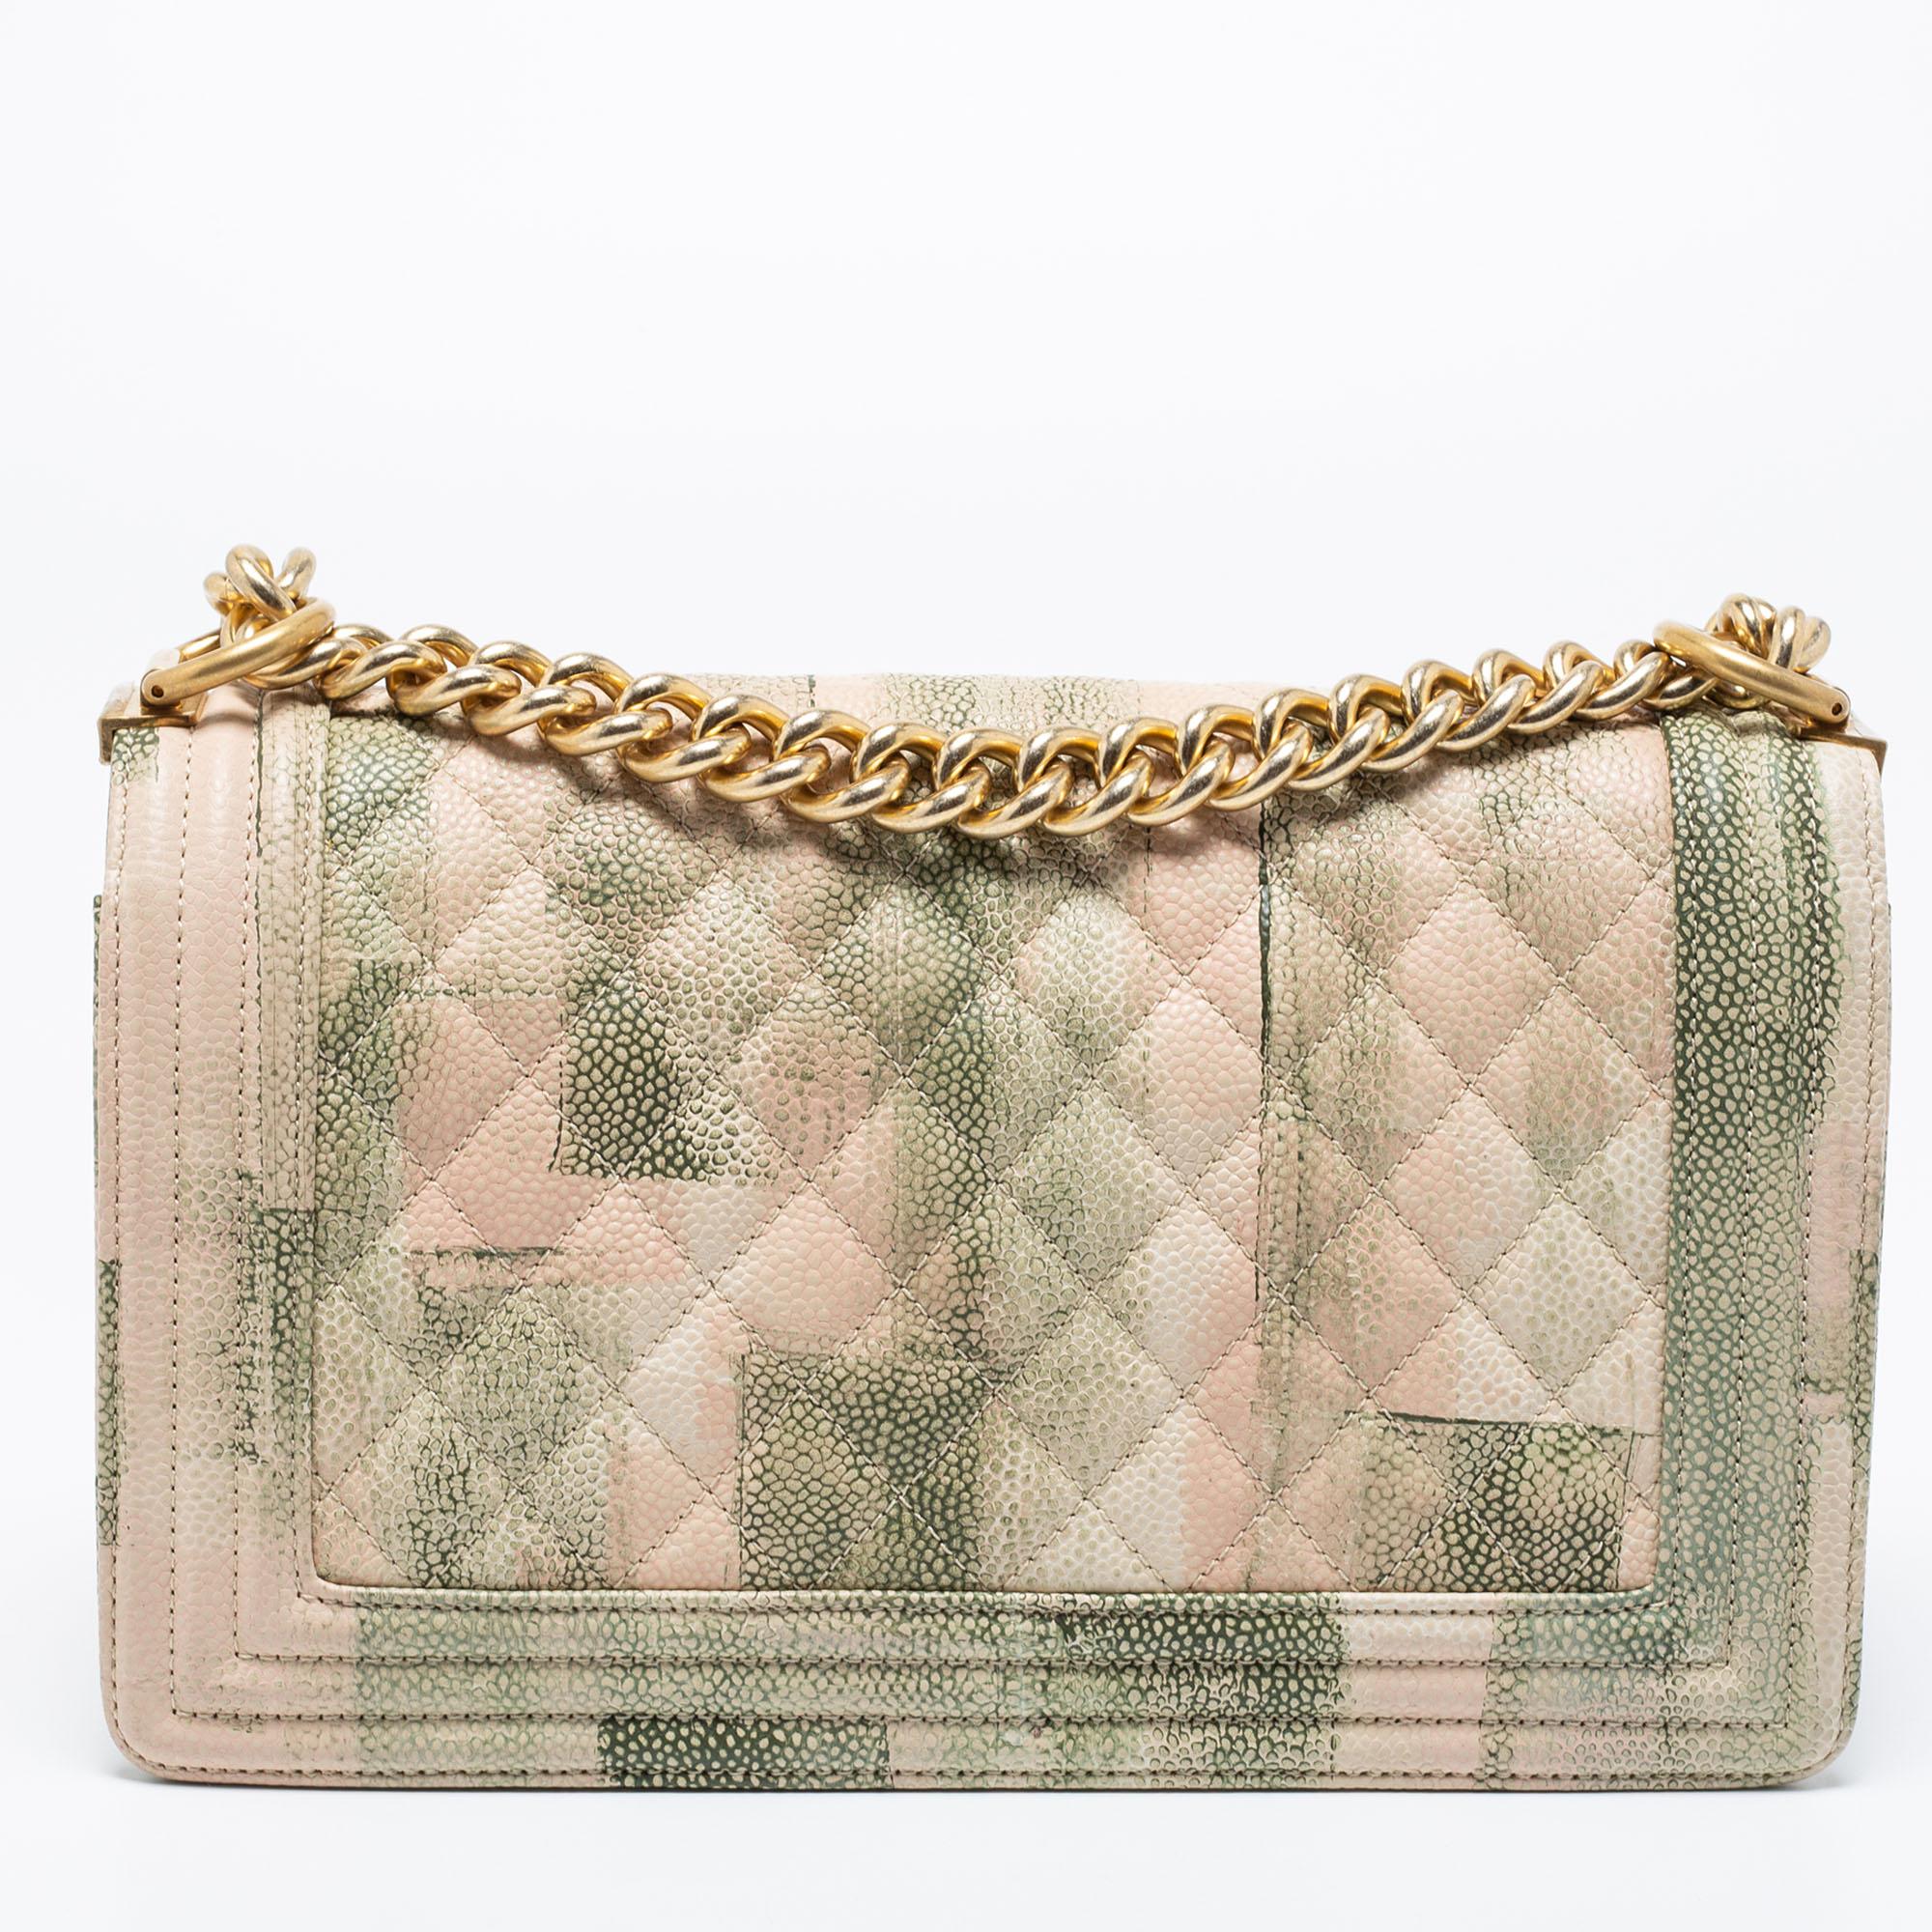 Every Chanel creation deserves to be a part of your closet as they carry irreplaceable style, just like this Boy flap bag that has been exquisitely crafted from quilted leather. The piece has the iconic CC logo, and a lovely chain-link strap just so